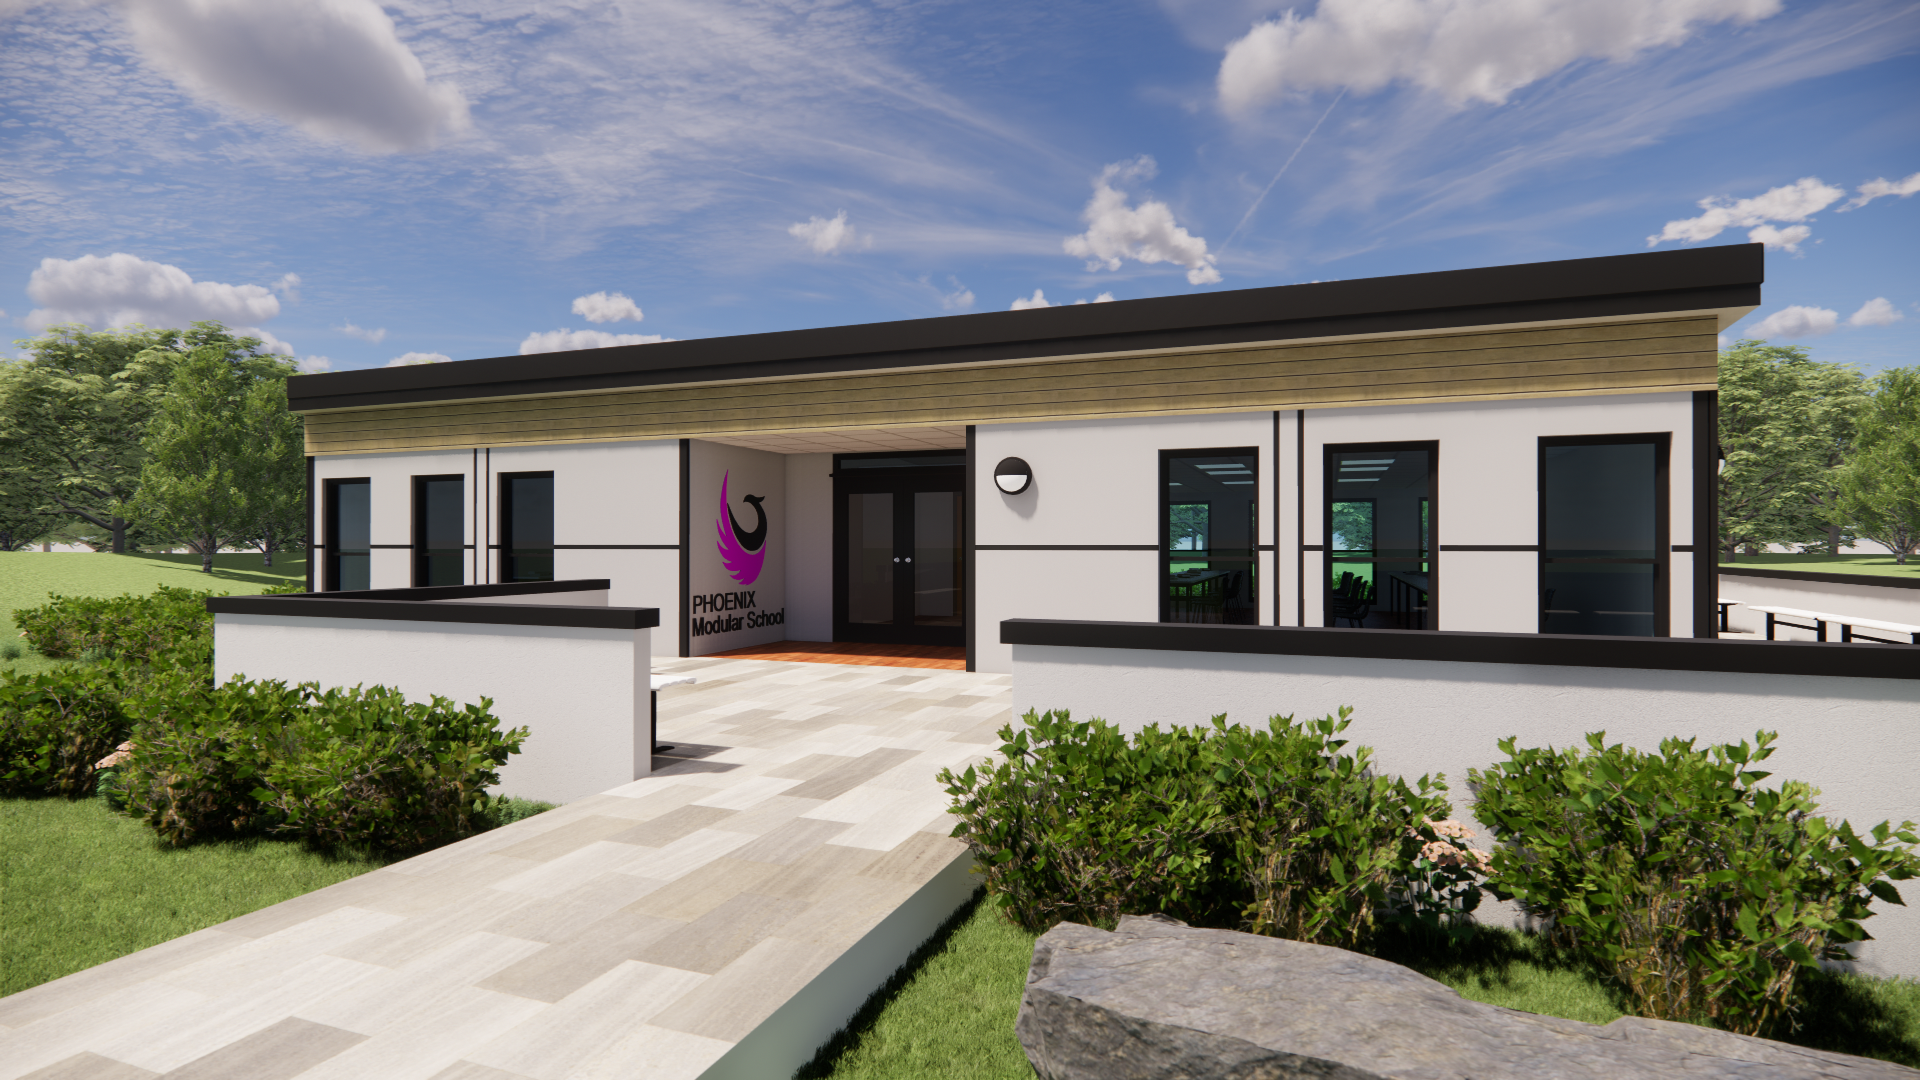 Phoenix Building Systems’ new product range makes buying a modular building a breeze